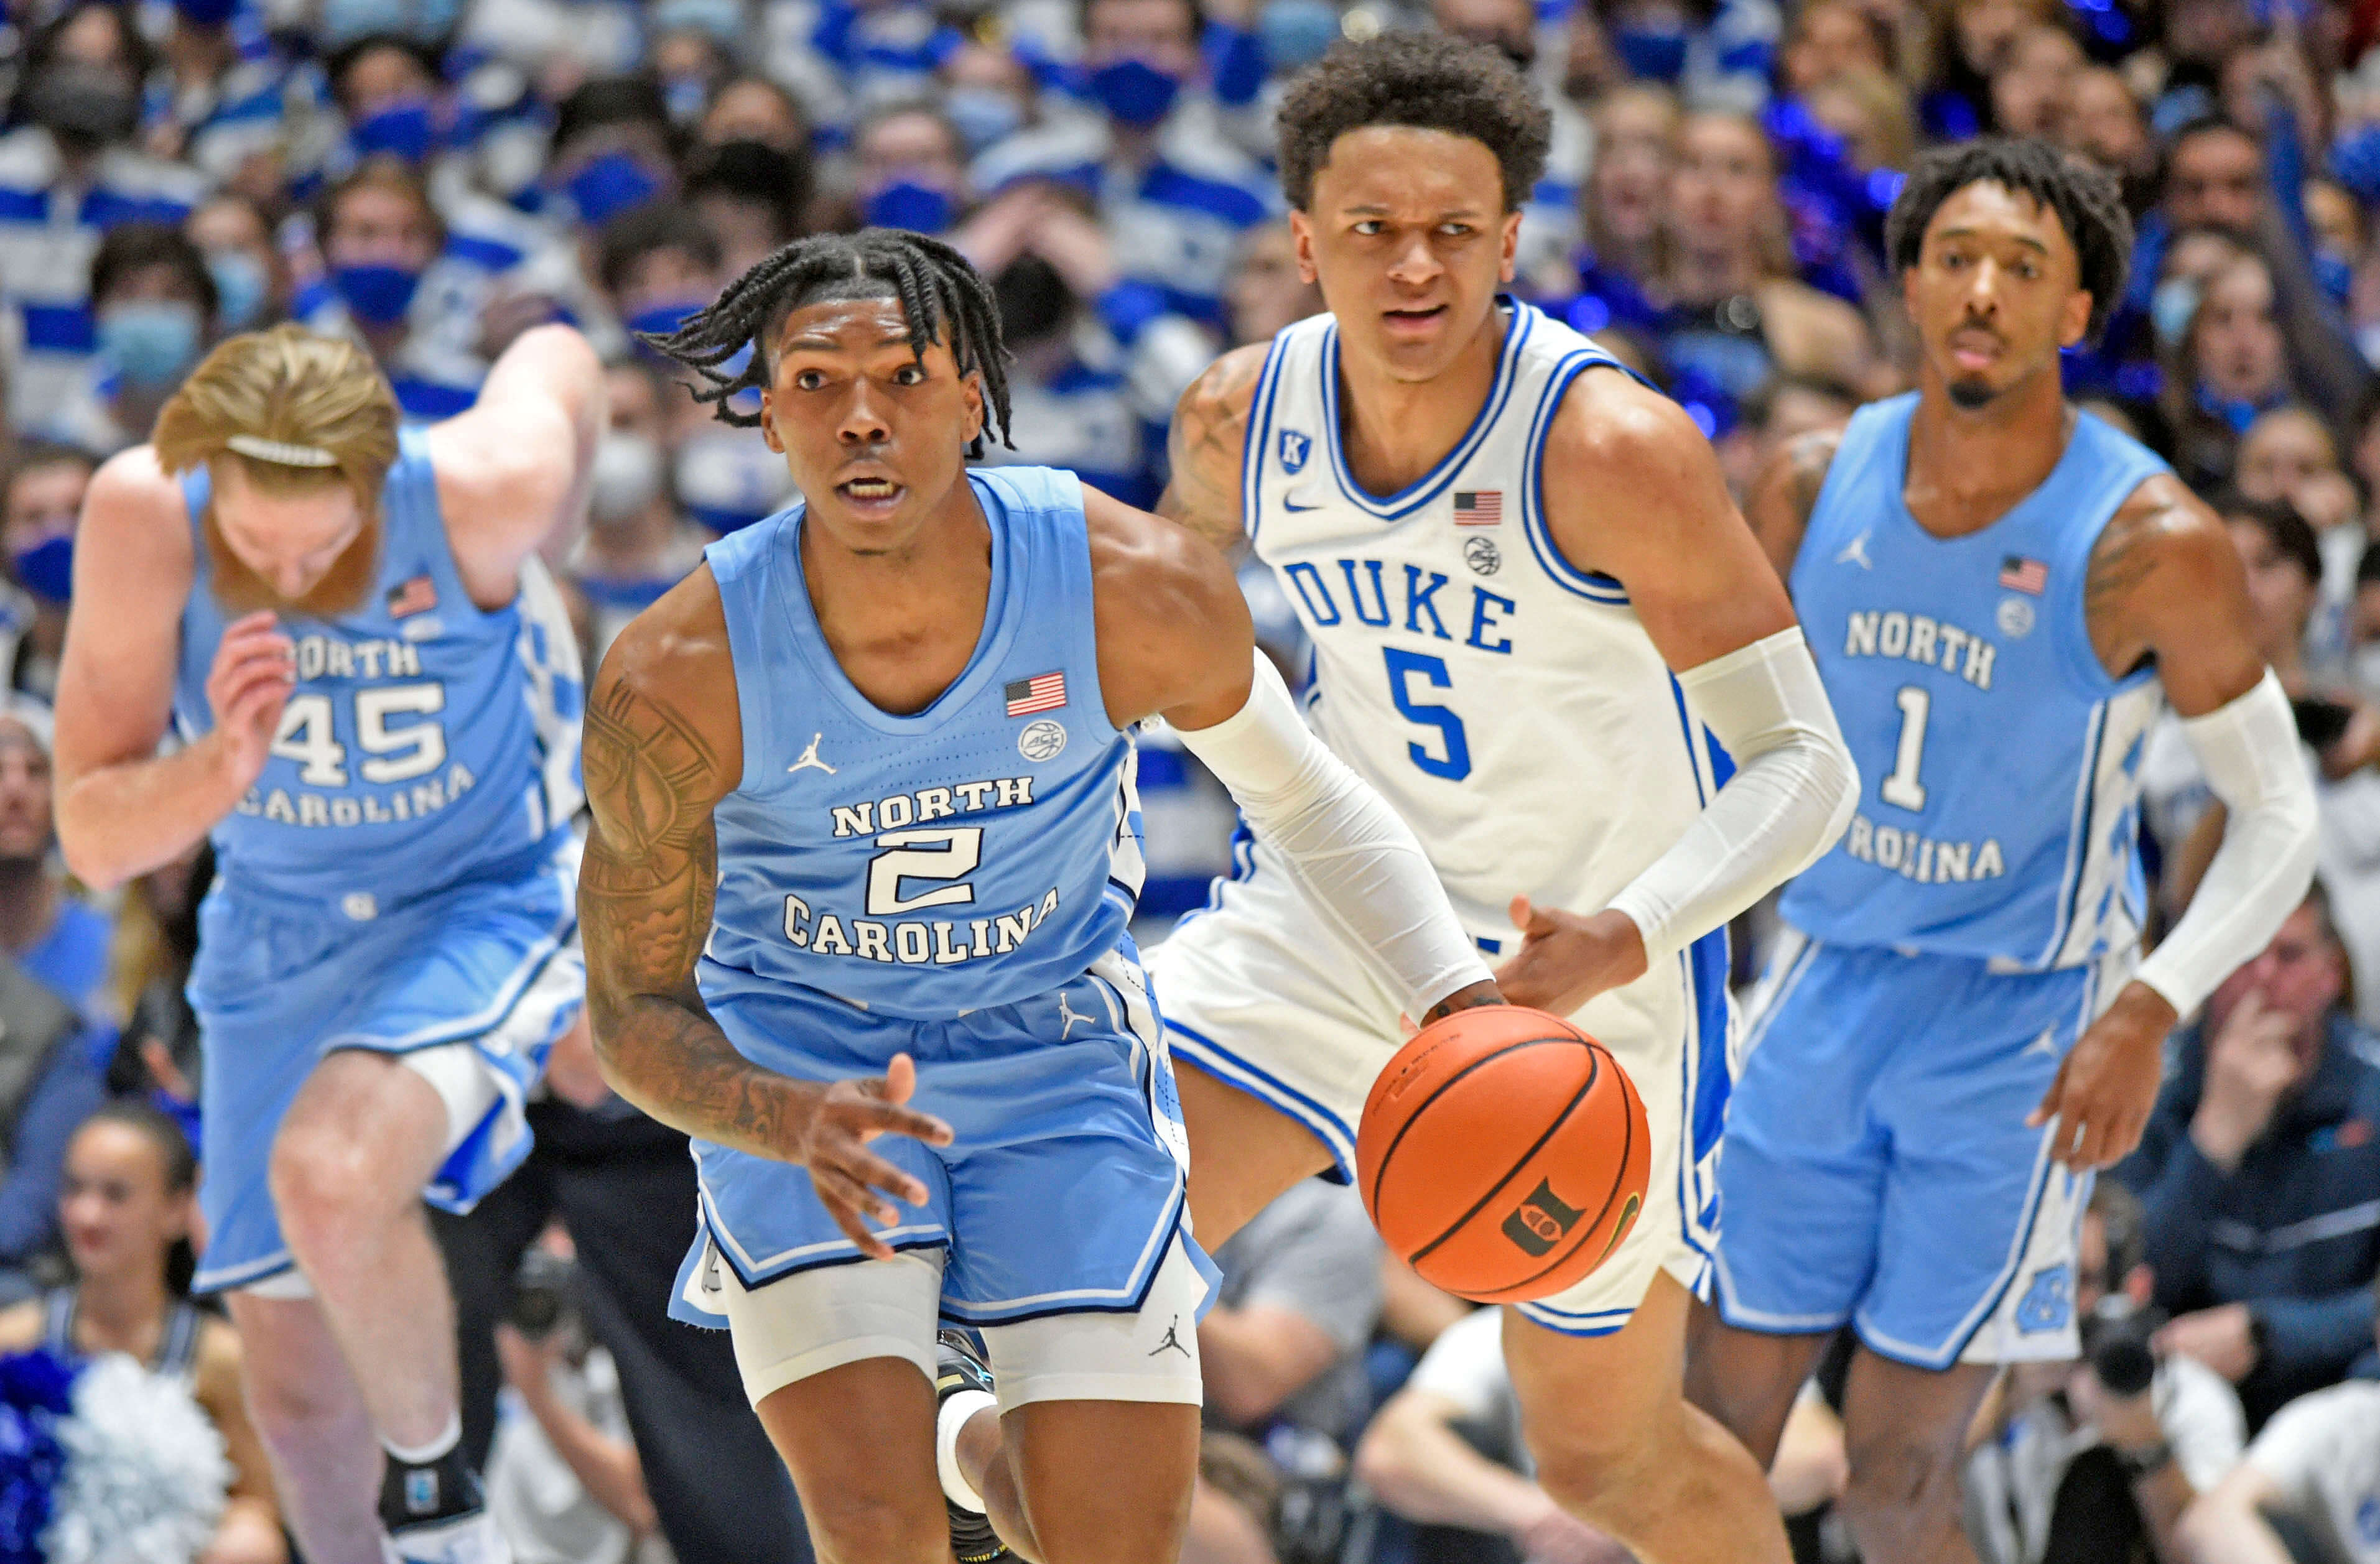 How To Bet - North Carolina vs Duke Final Four Picks: Fade Blue Devils in Highly-Anticipated Rivalry Matchup